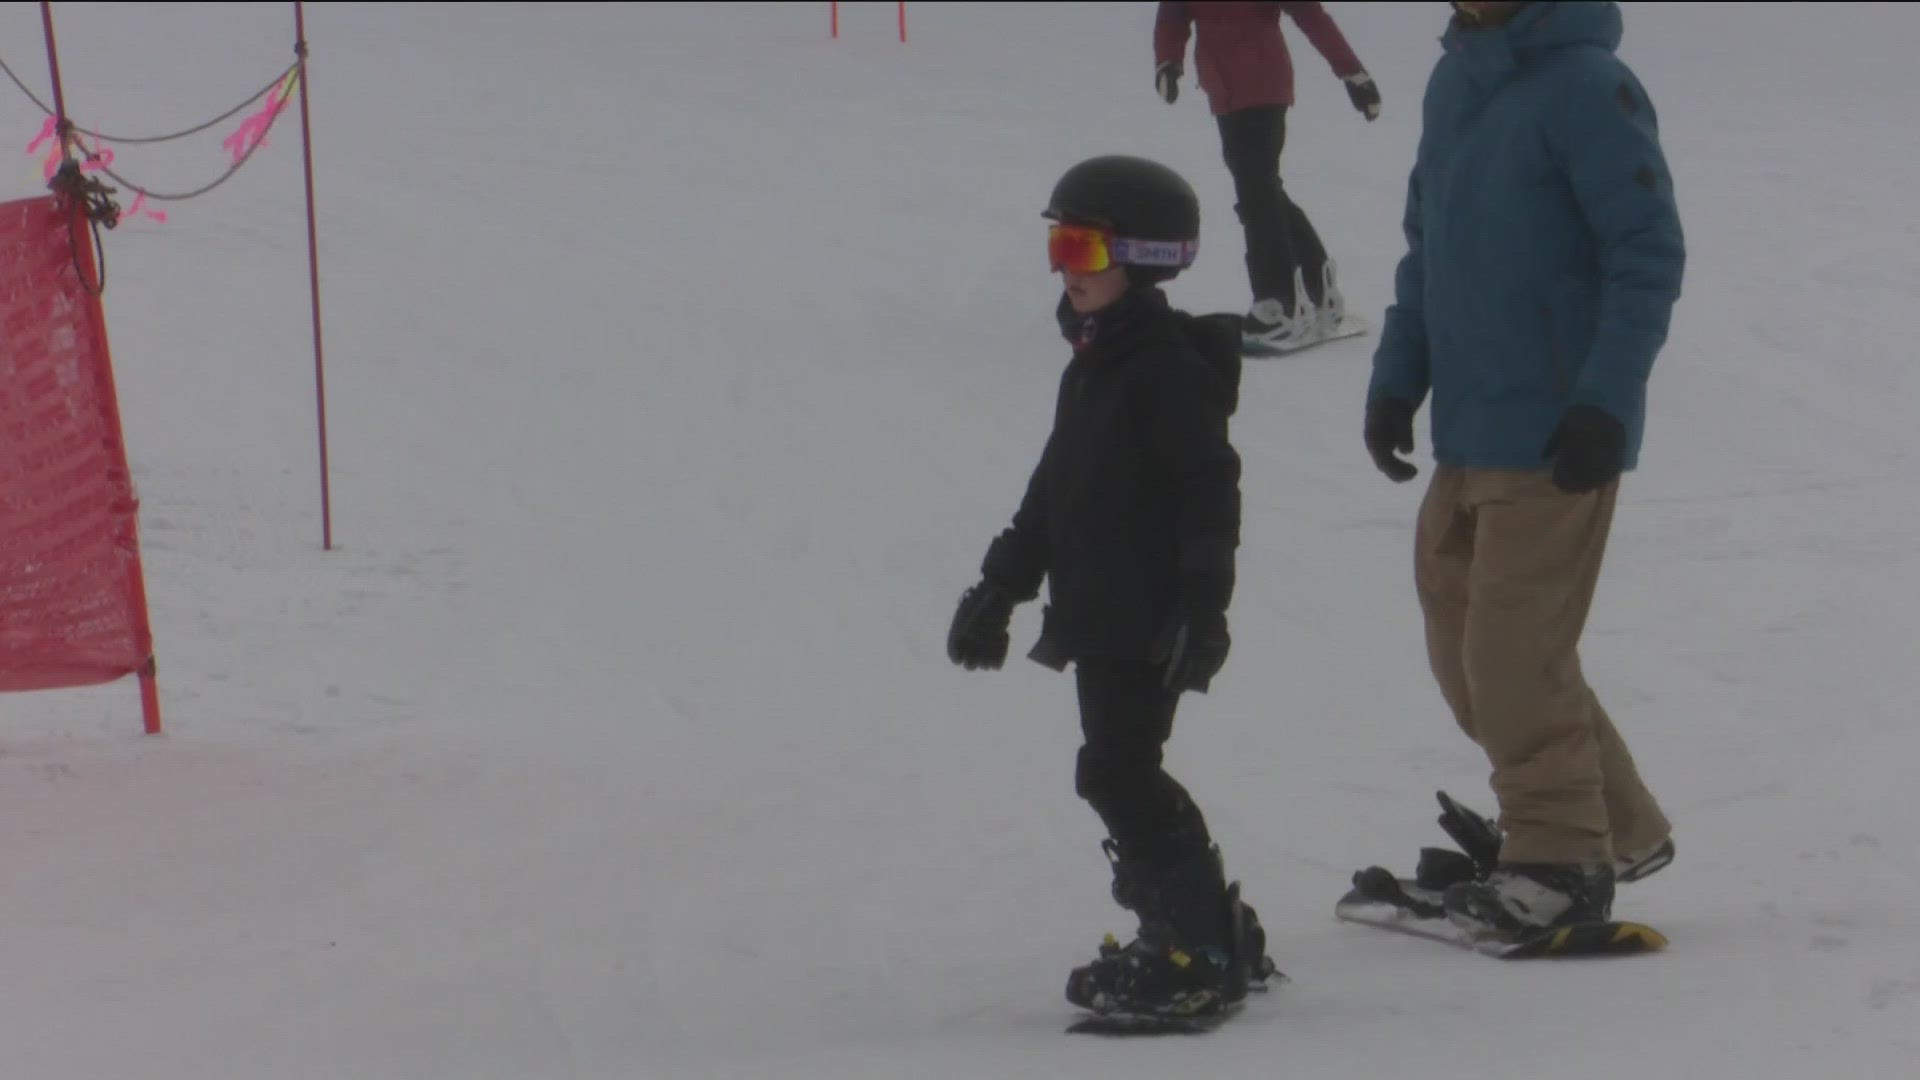 The new snow is just what the resorts needed to kick the season into high-gear.